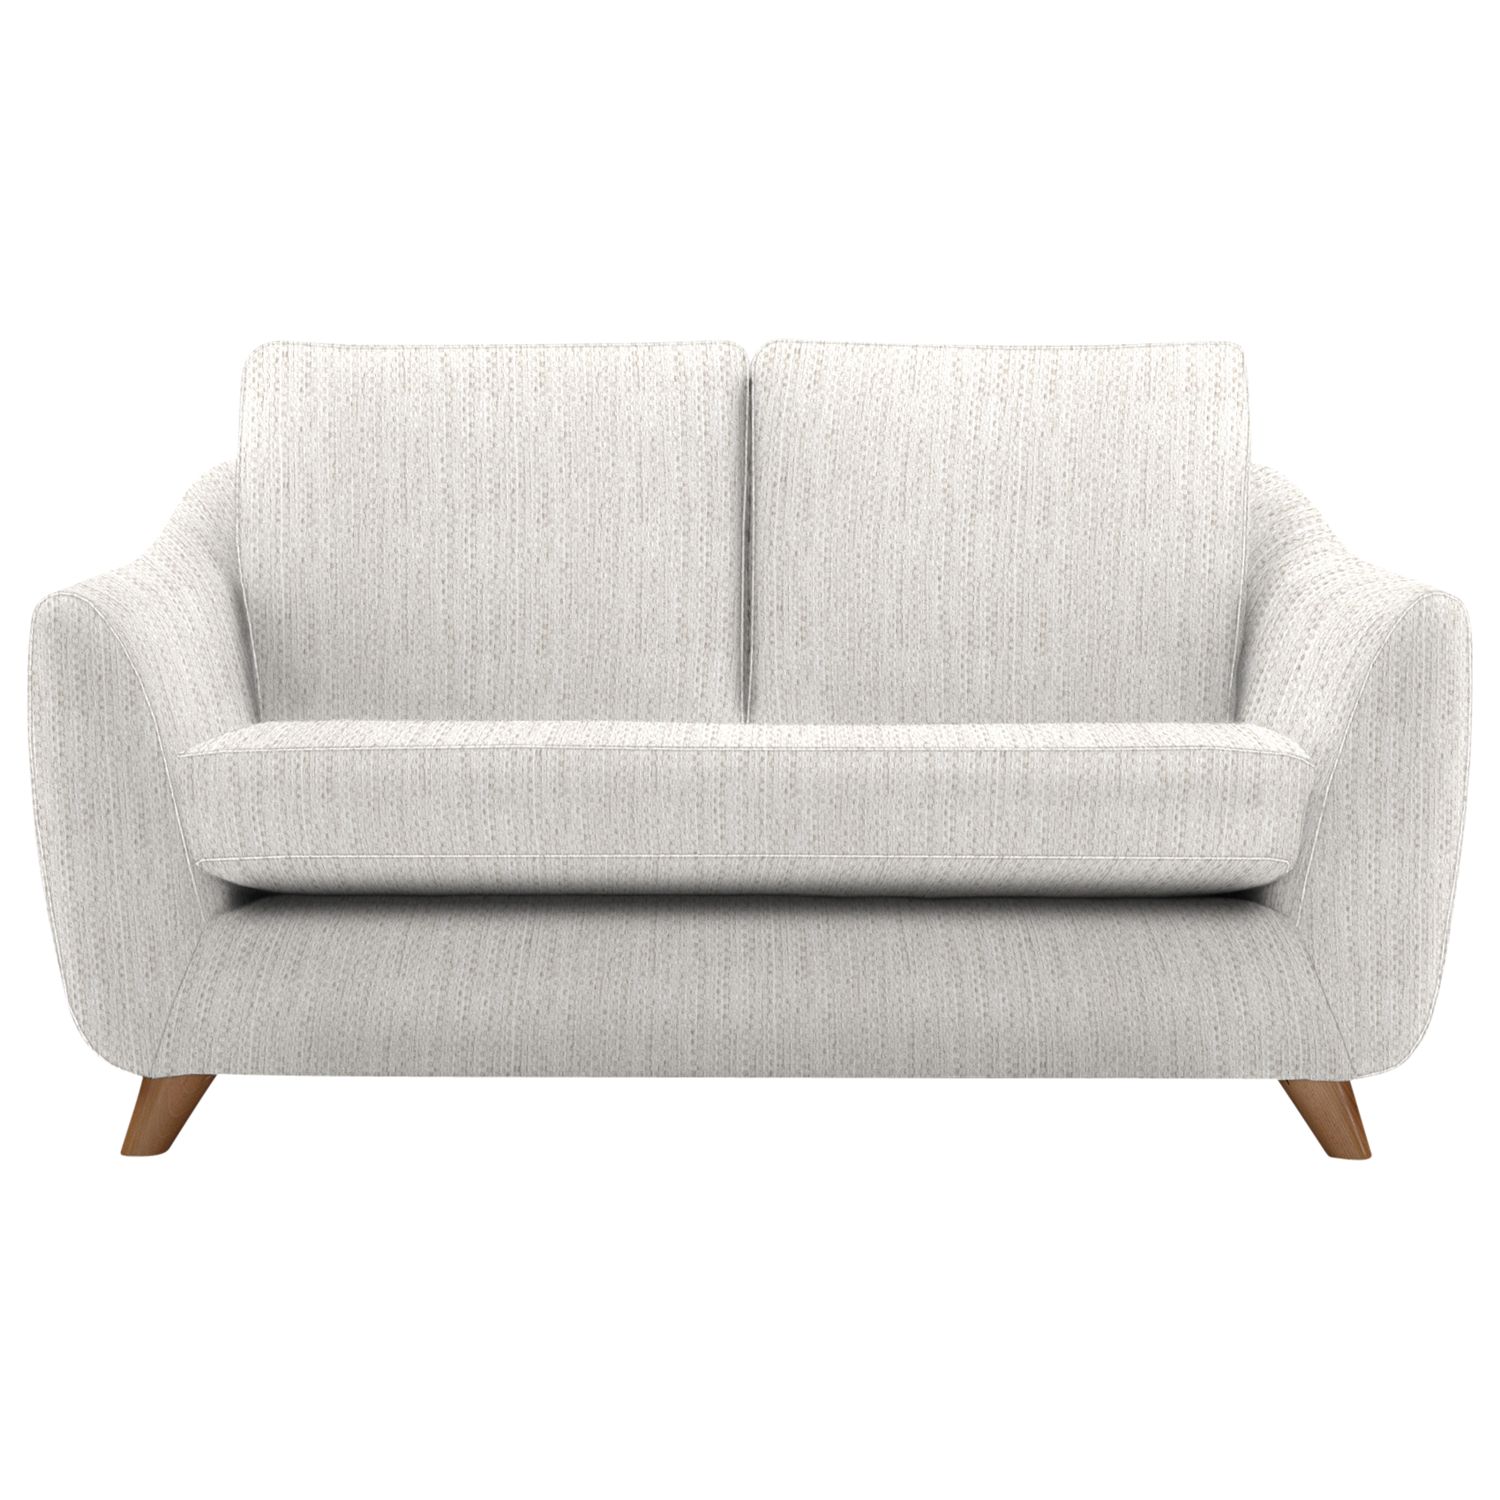 G Plan Vintage The Sixty Seven Small Sofa, Weave Oatmeal, width 154cm